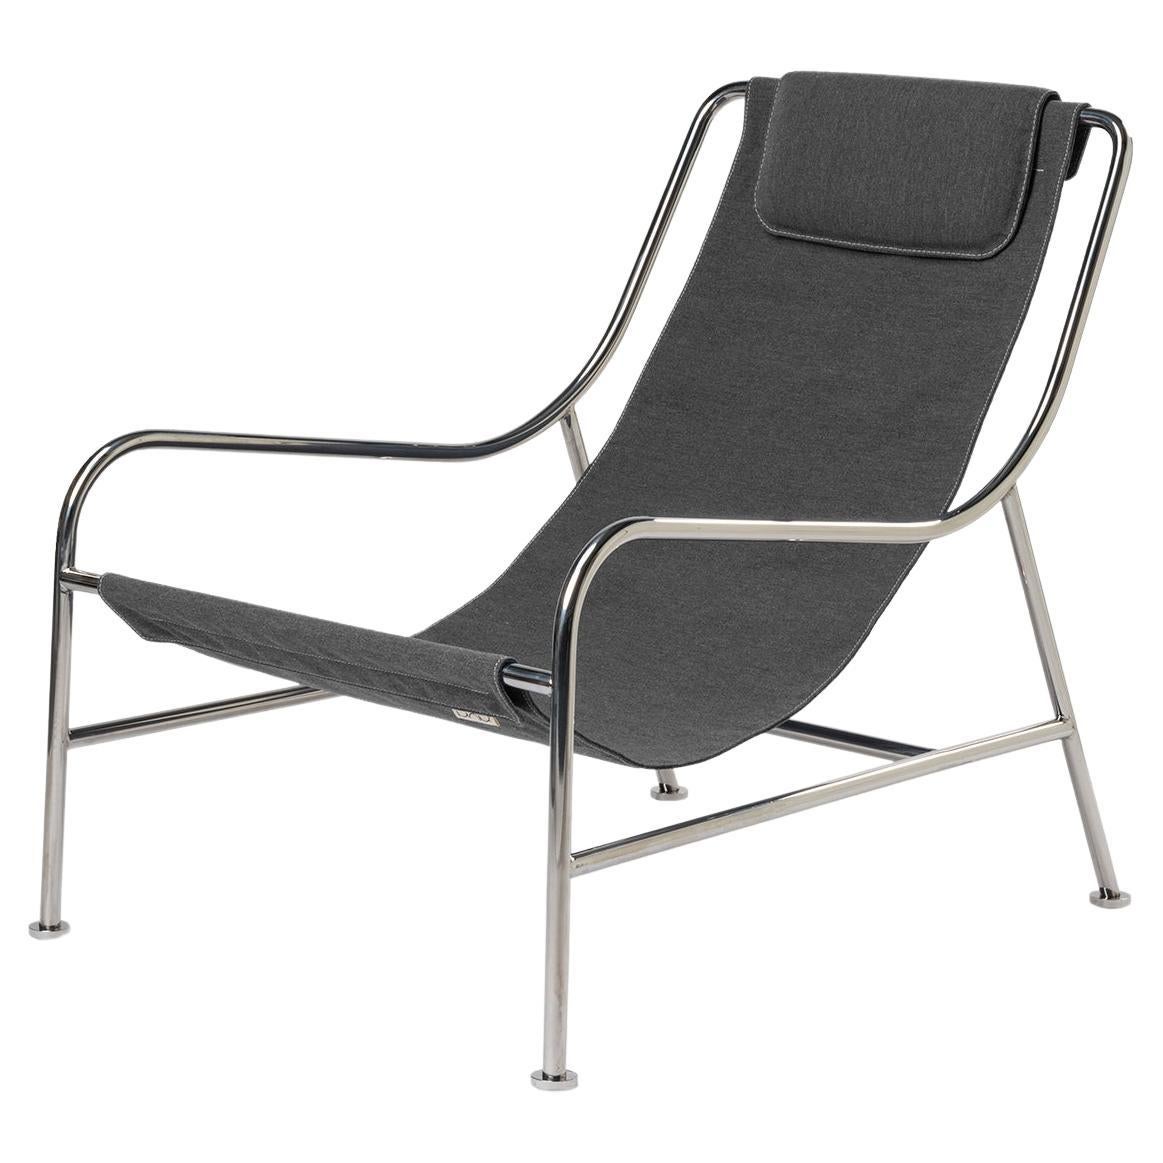 Minimalist Outdoor Lounge Chair in "Slate" Fabric and Brushed Stainless Steel